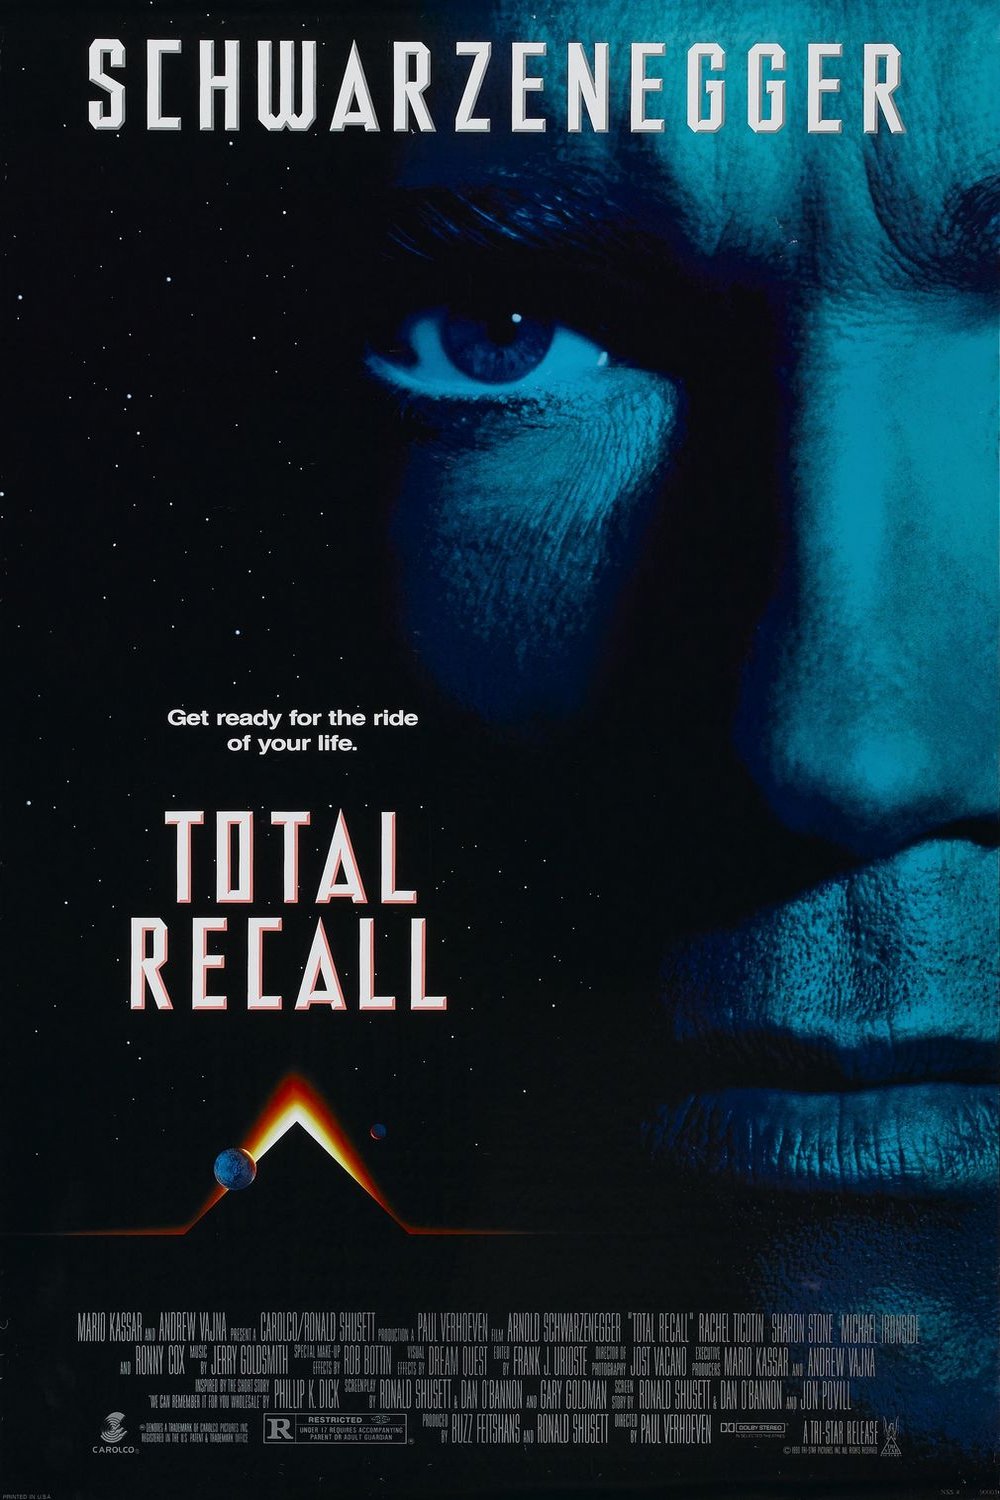 Poster of the movie Total Recall